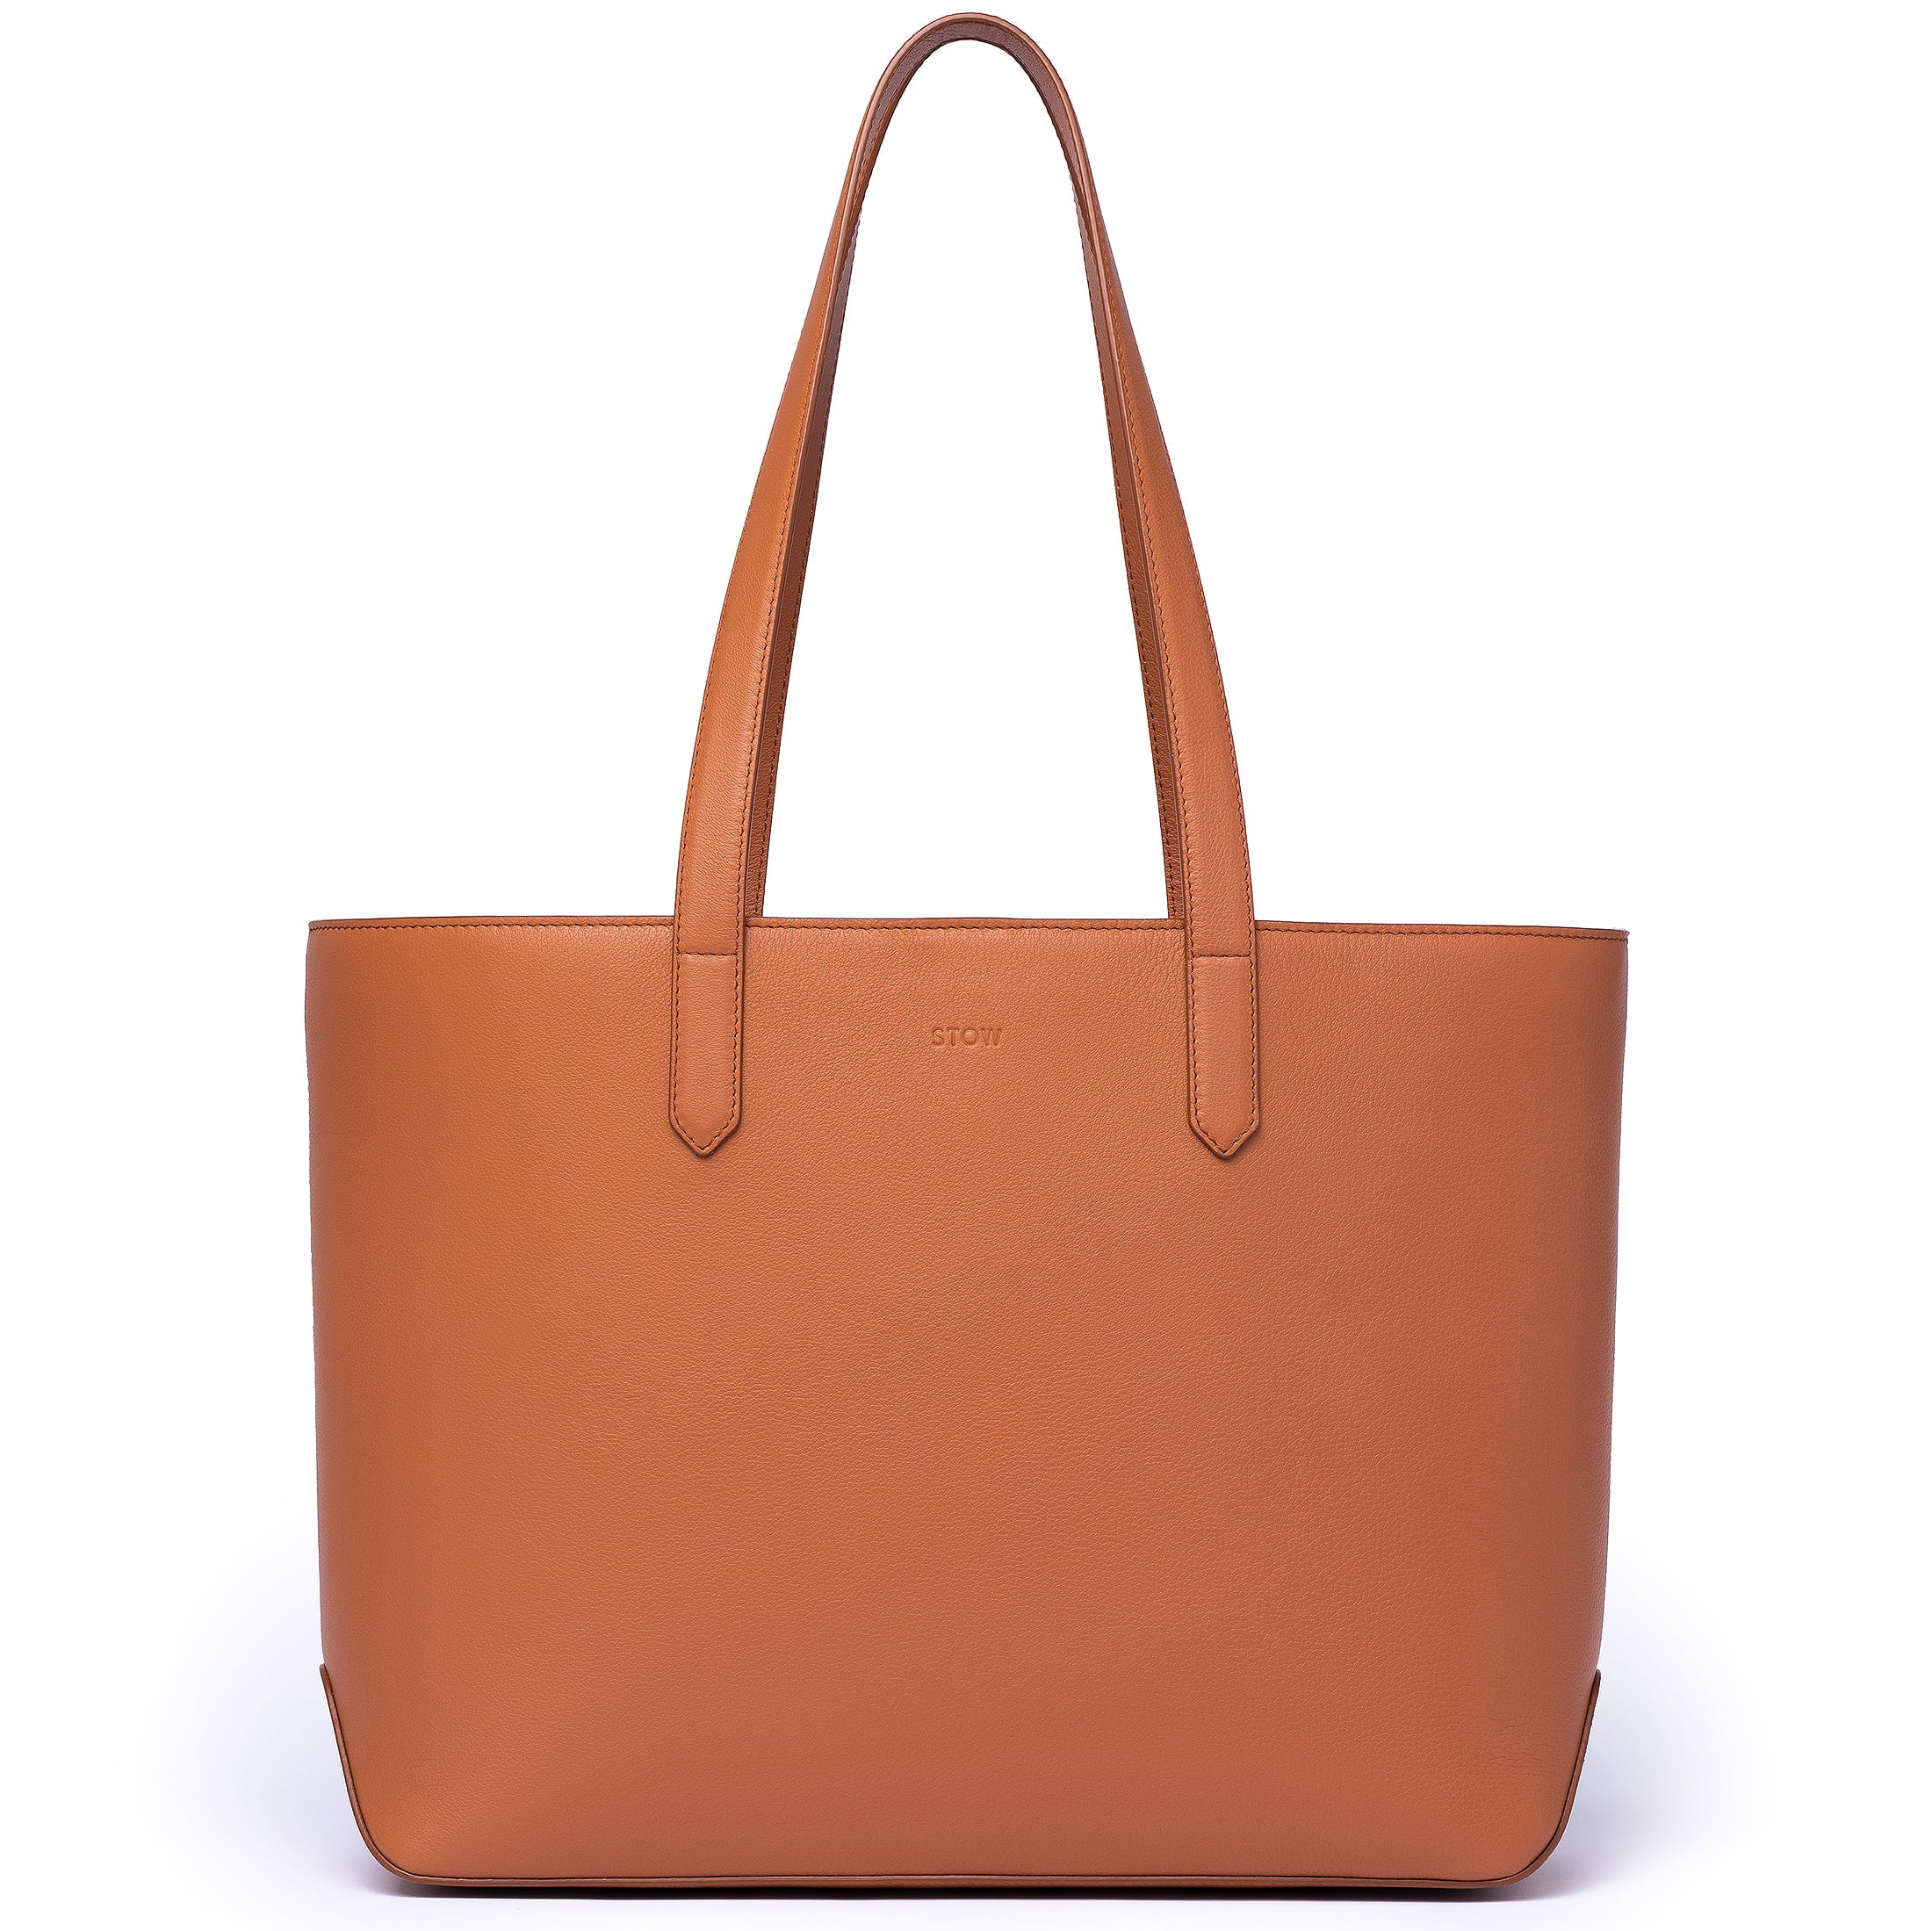 Earth Tan Leather Tote Bag – STOW